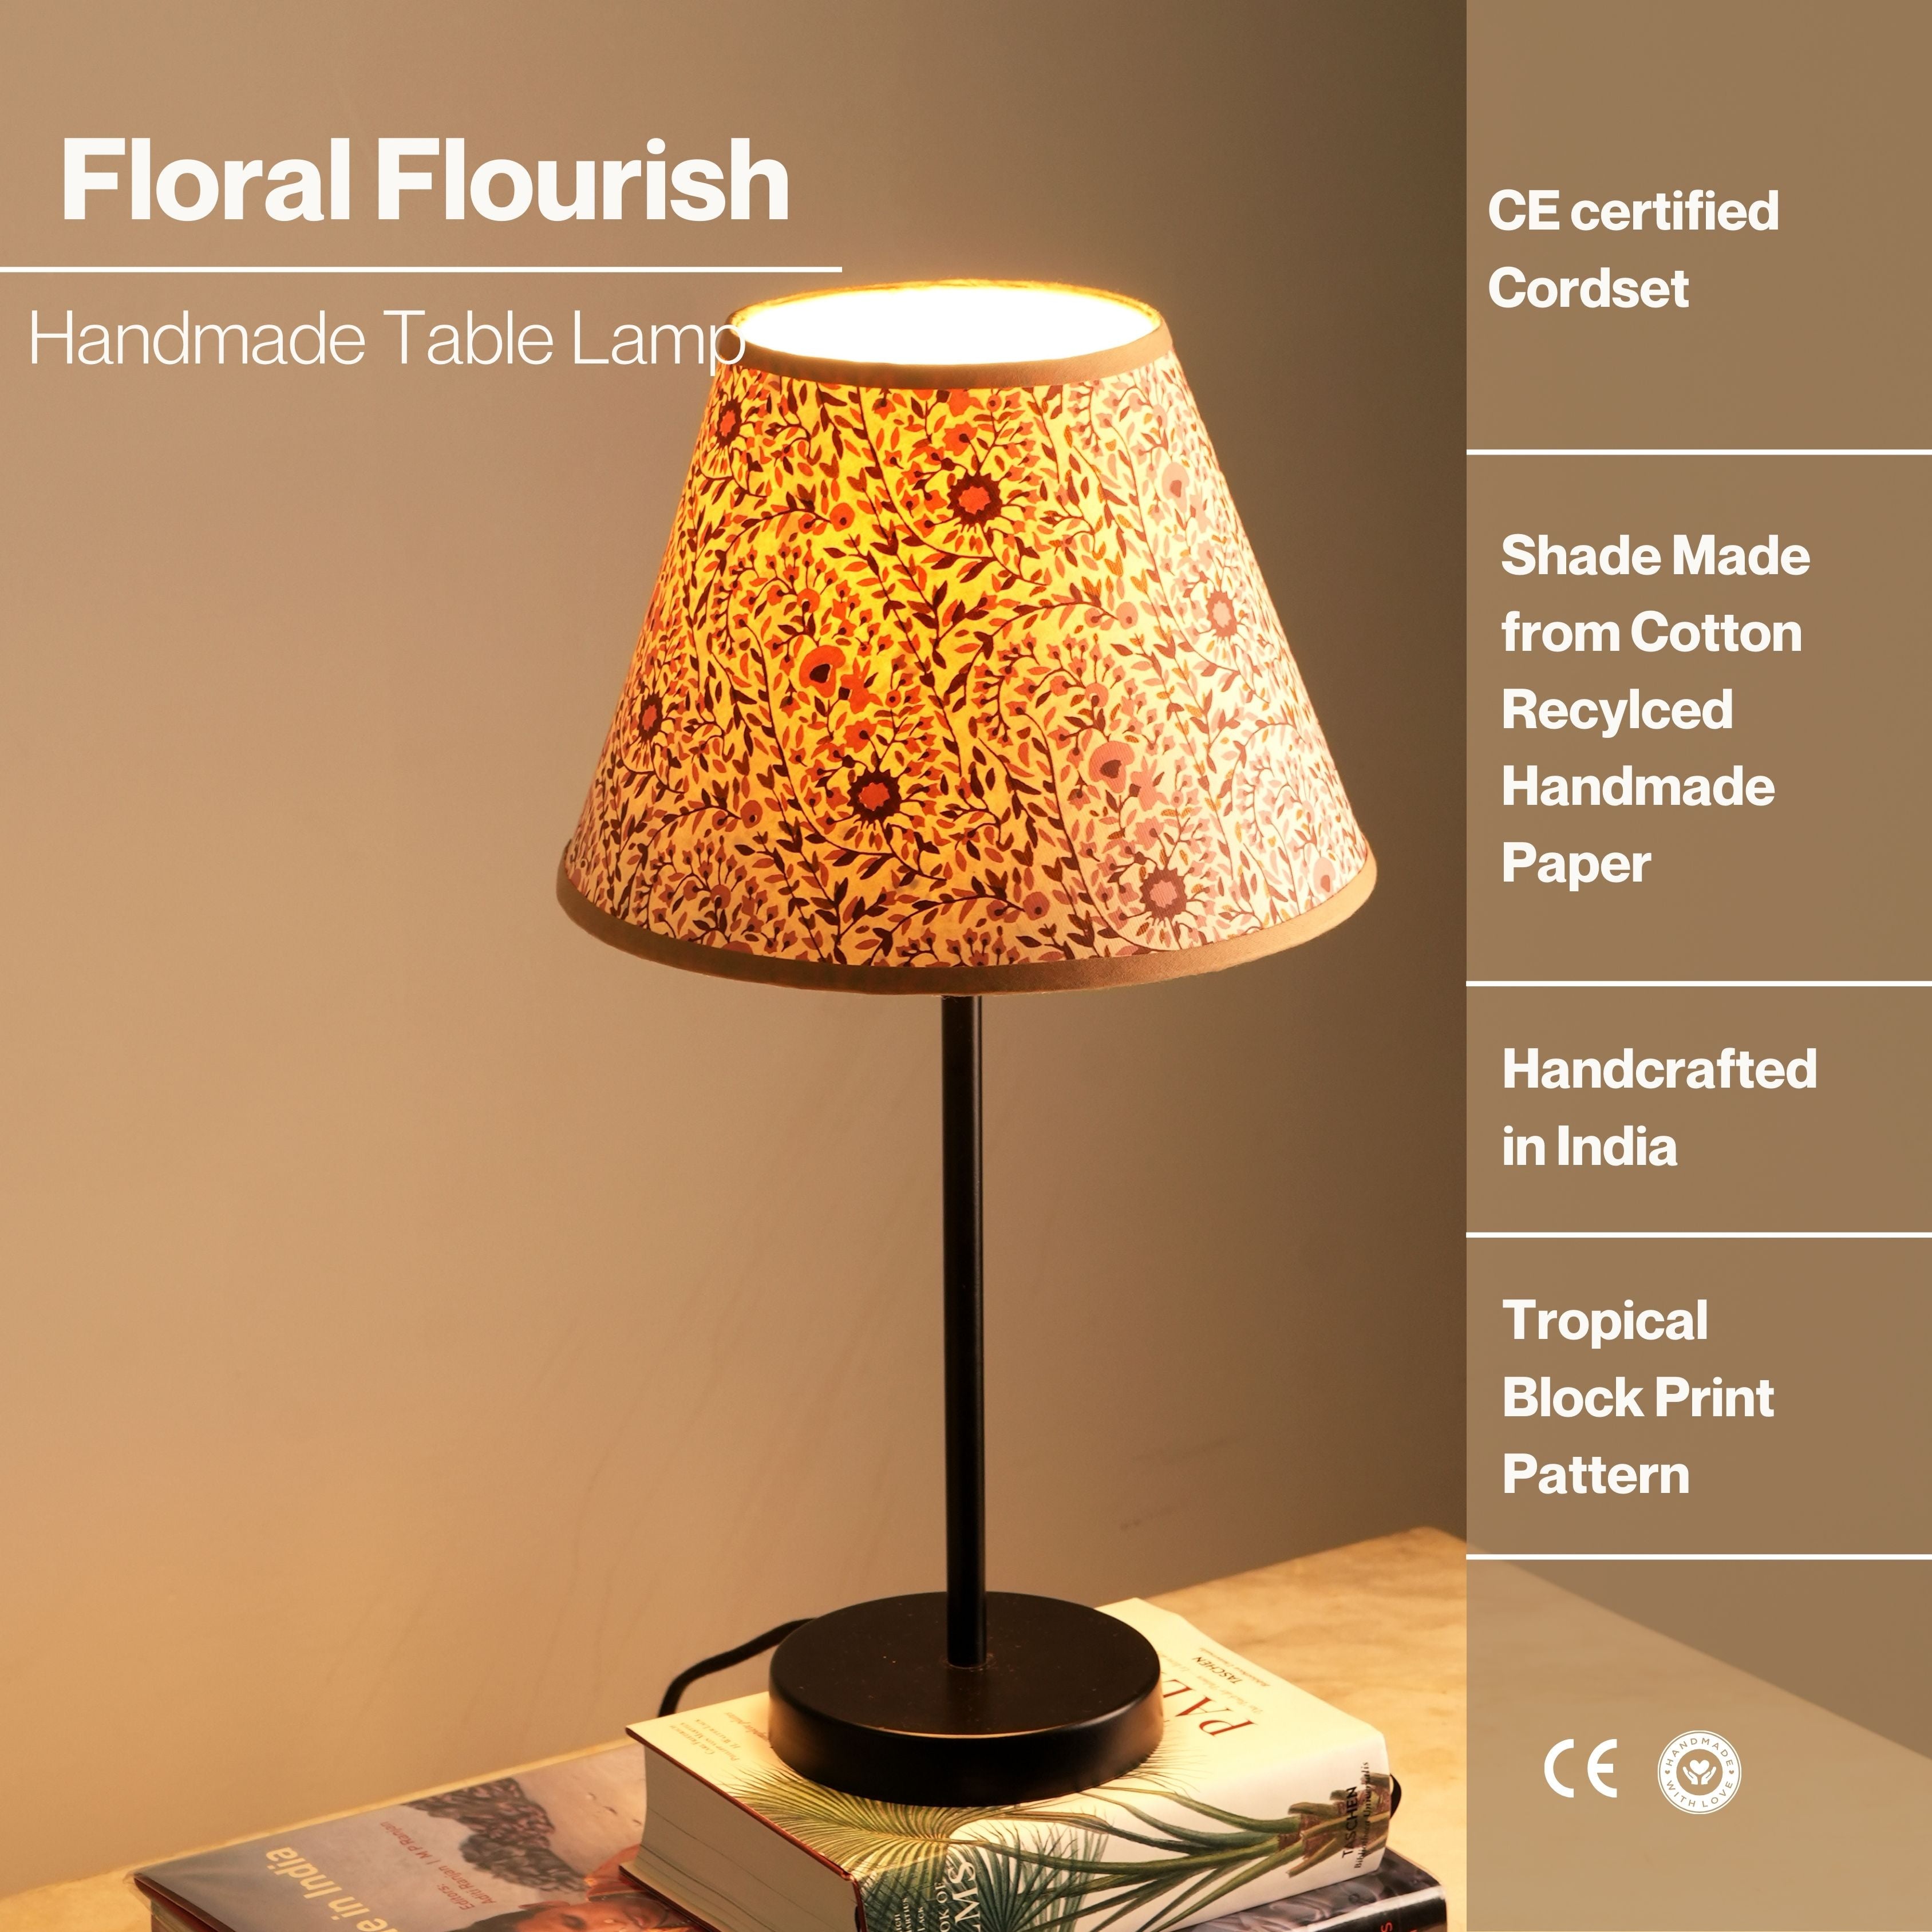 Nordic Night Table Lamp - Floral Flourish Print Desk Lamp - Bedside Lamp Made from Cotton Recycled Paper, Indian Block Printing Technique